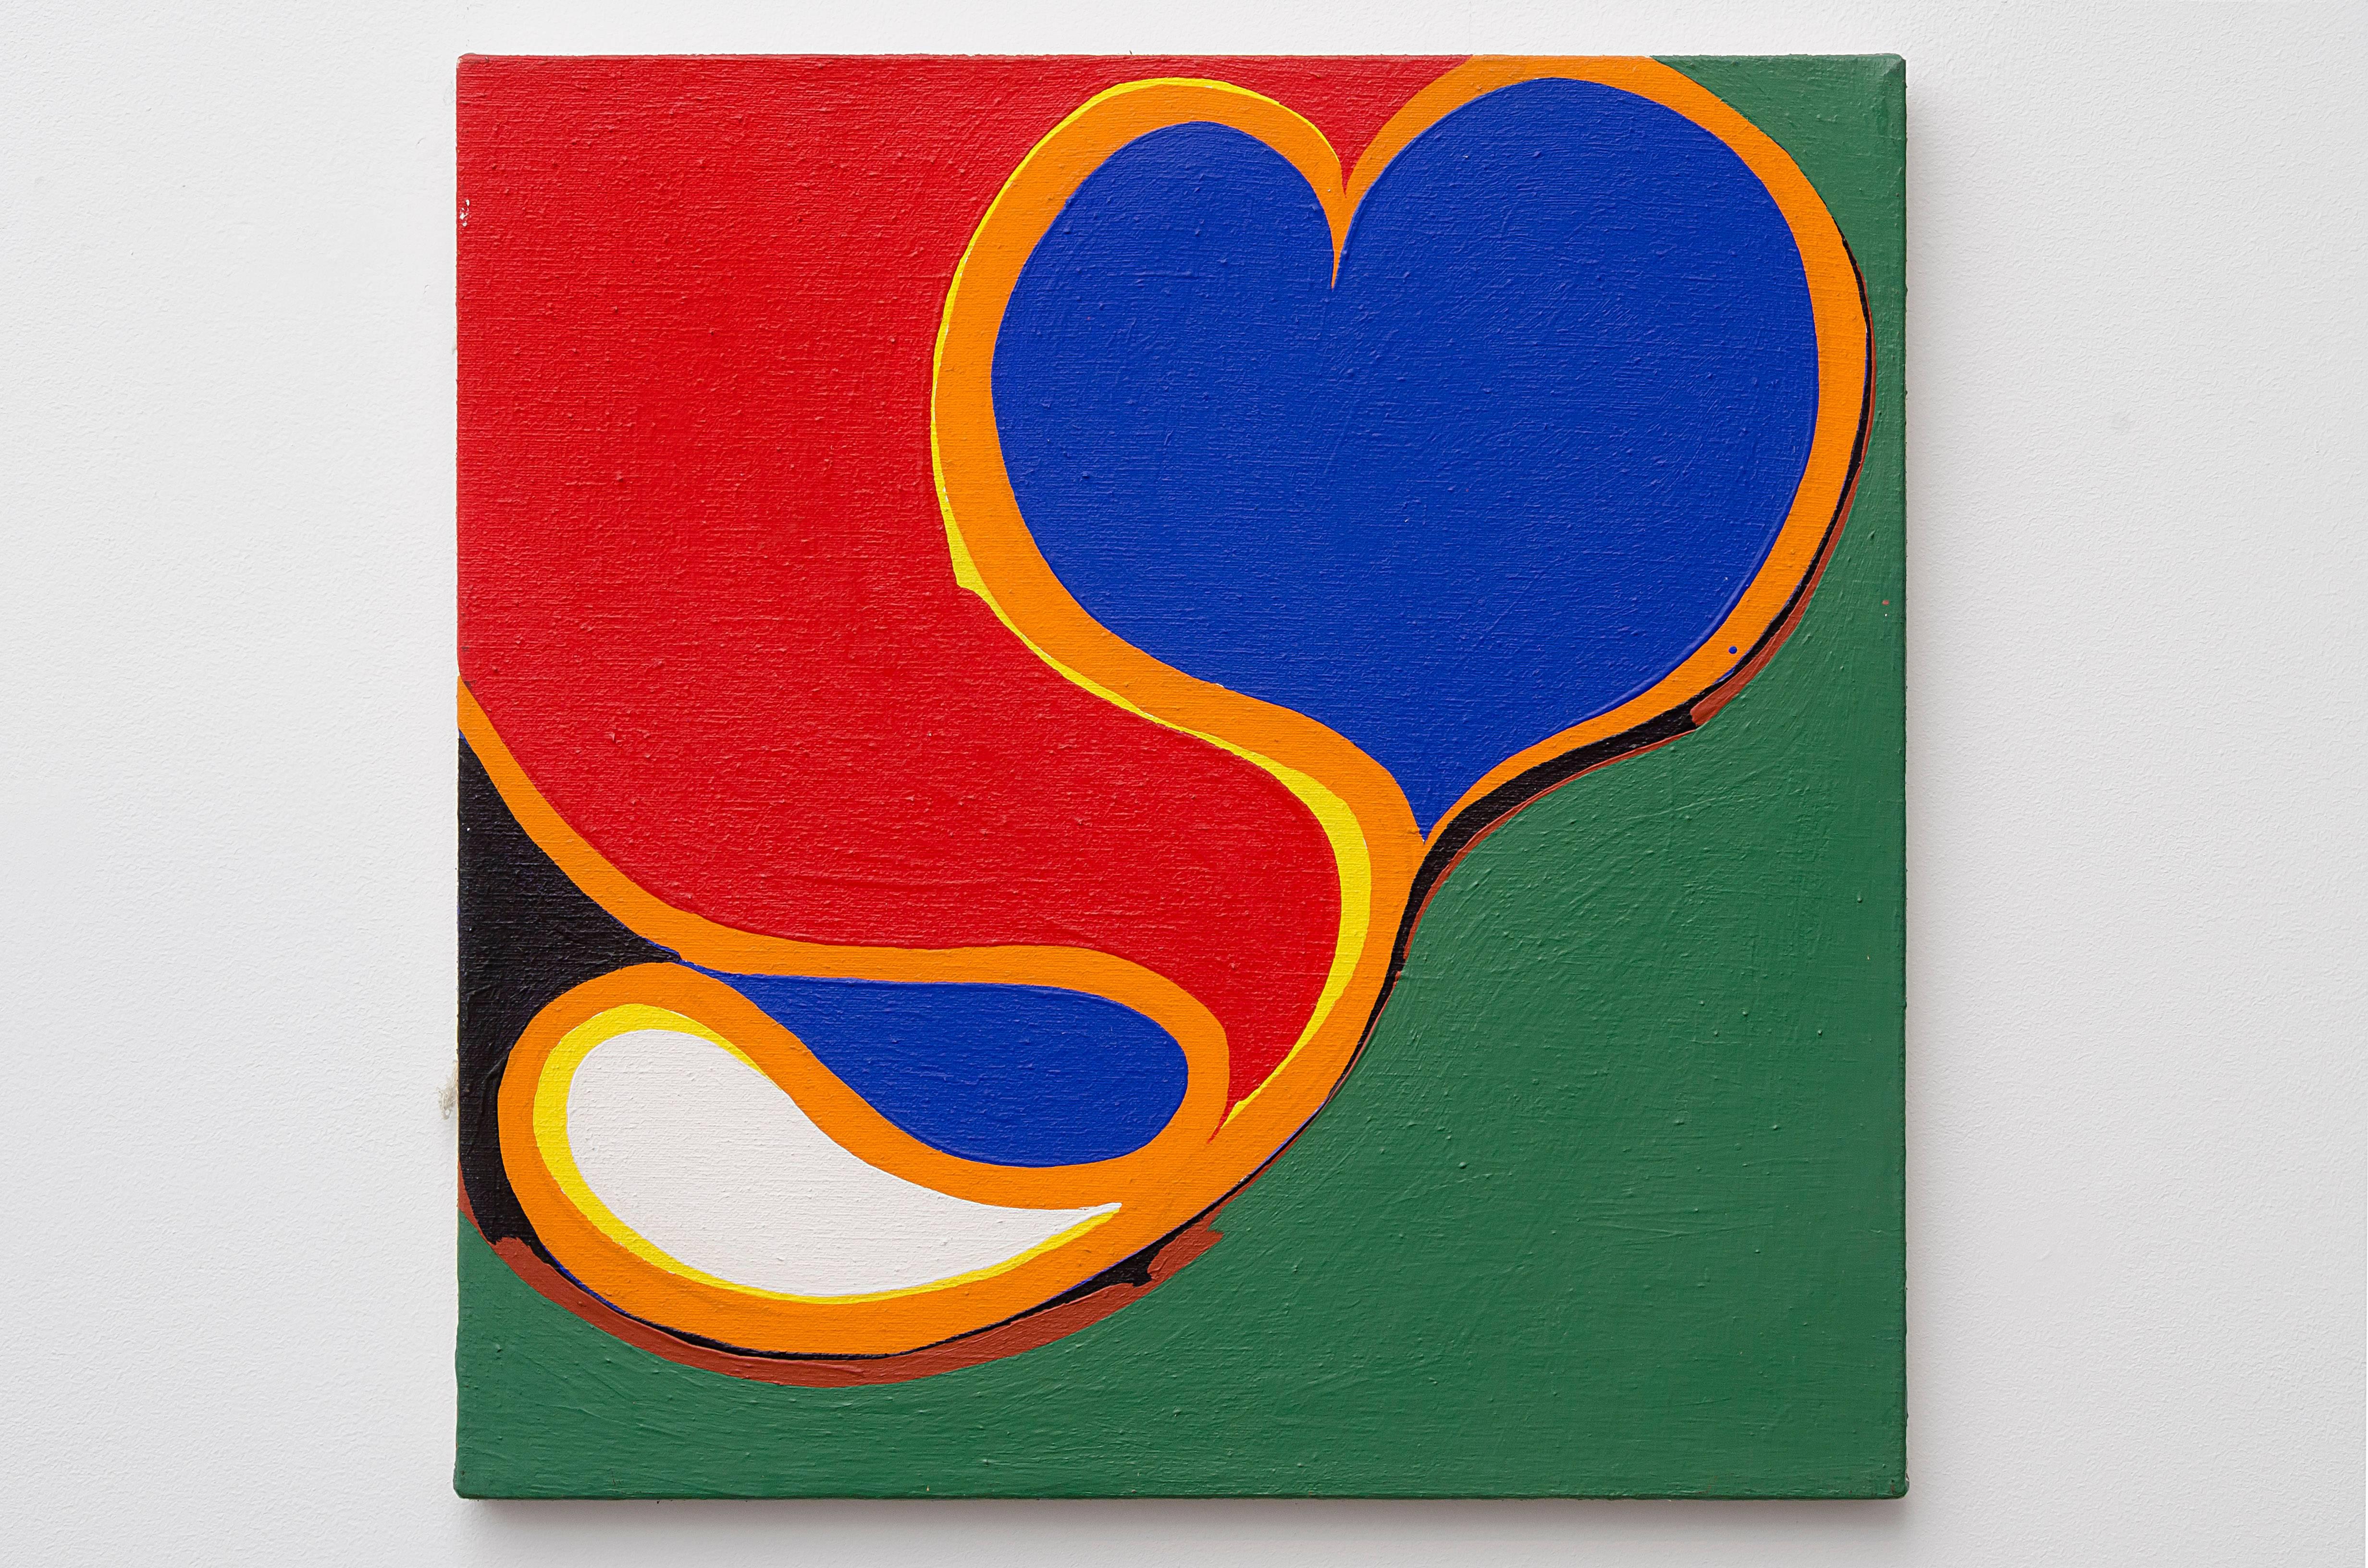 Matsumi Kanemitsu Abstract Painting - Hidalgo #11, colorful abstract geometric acrylic painting with heart shape 